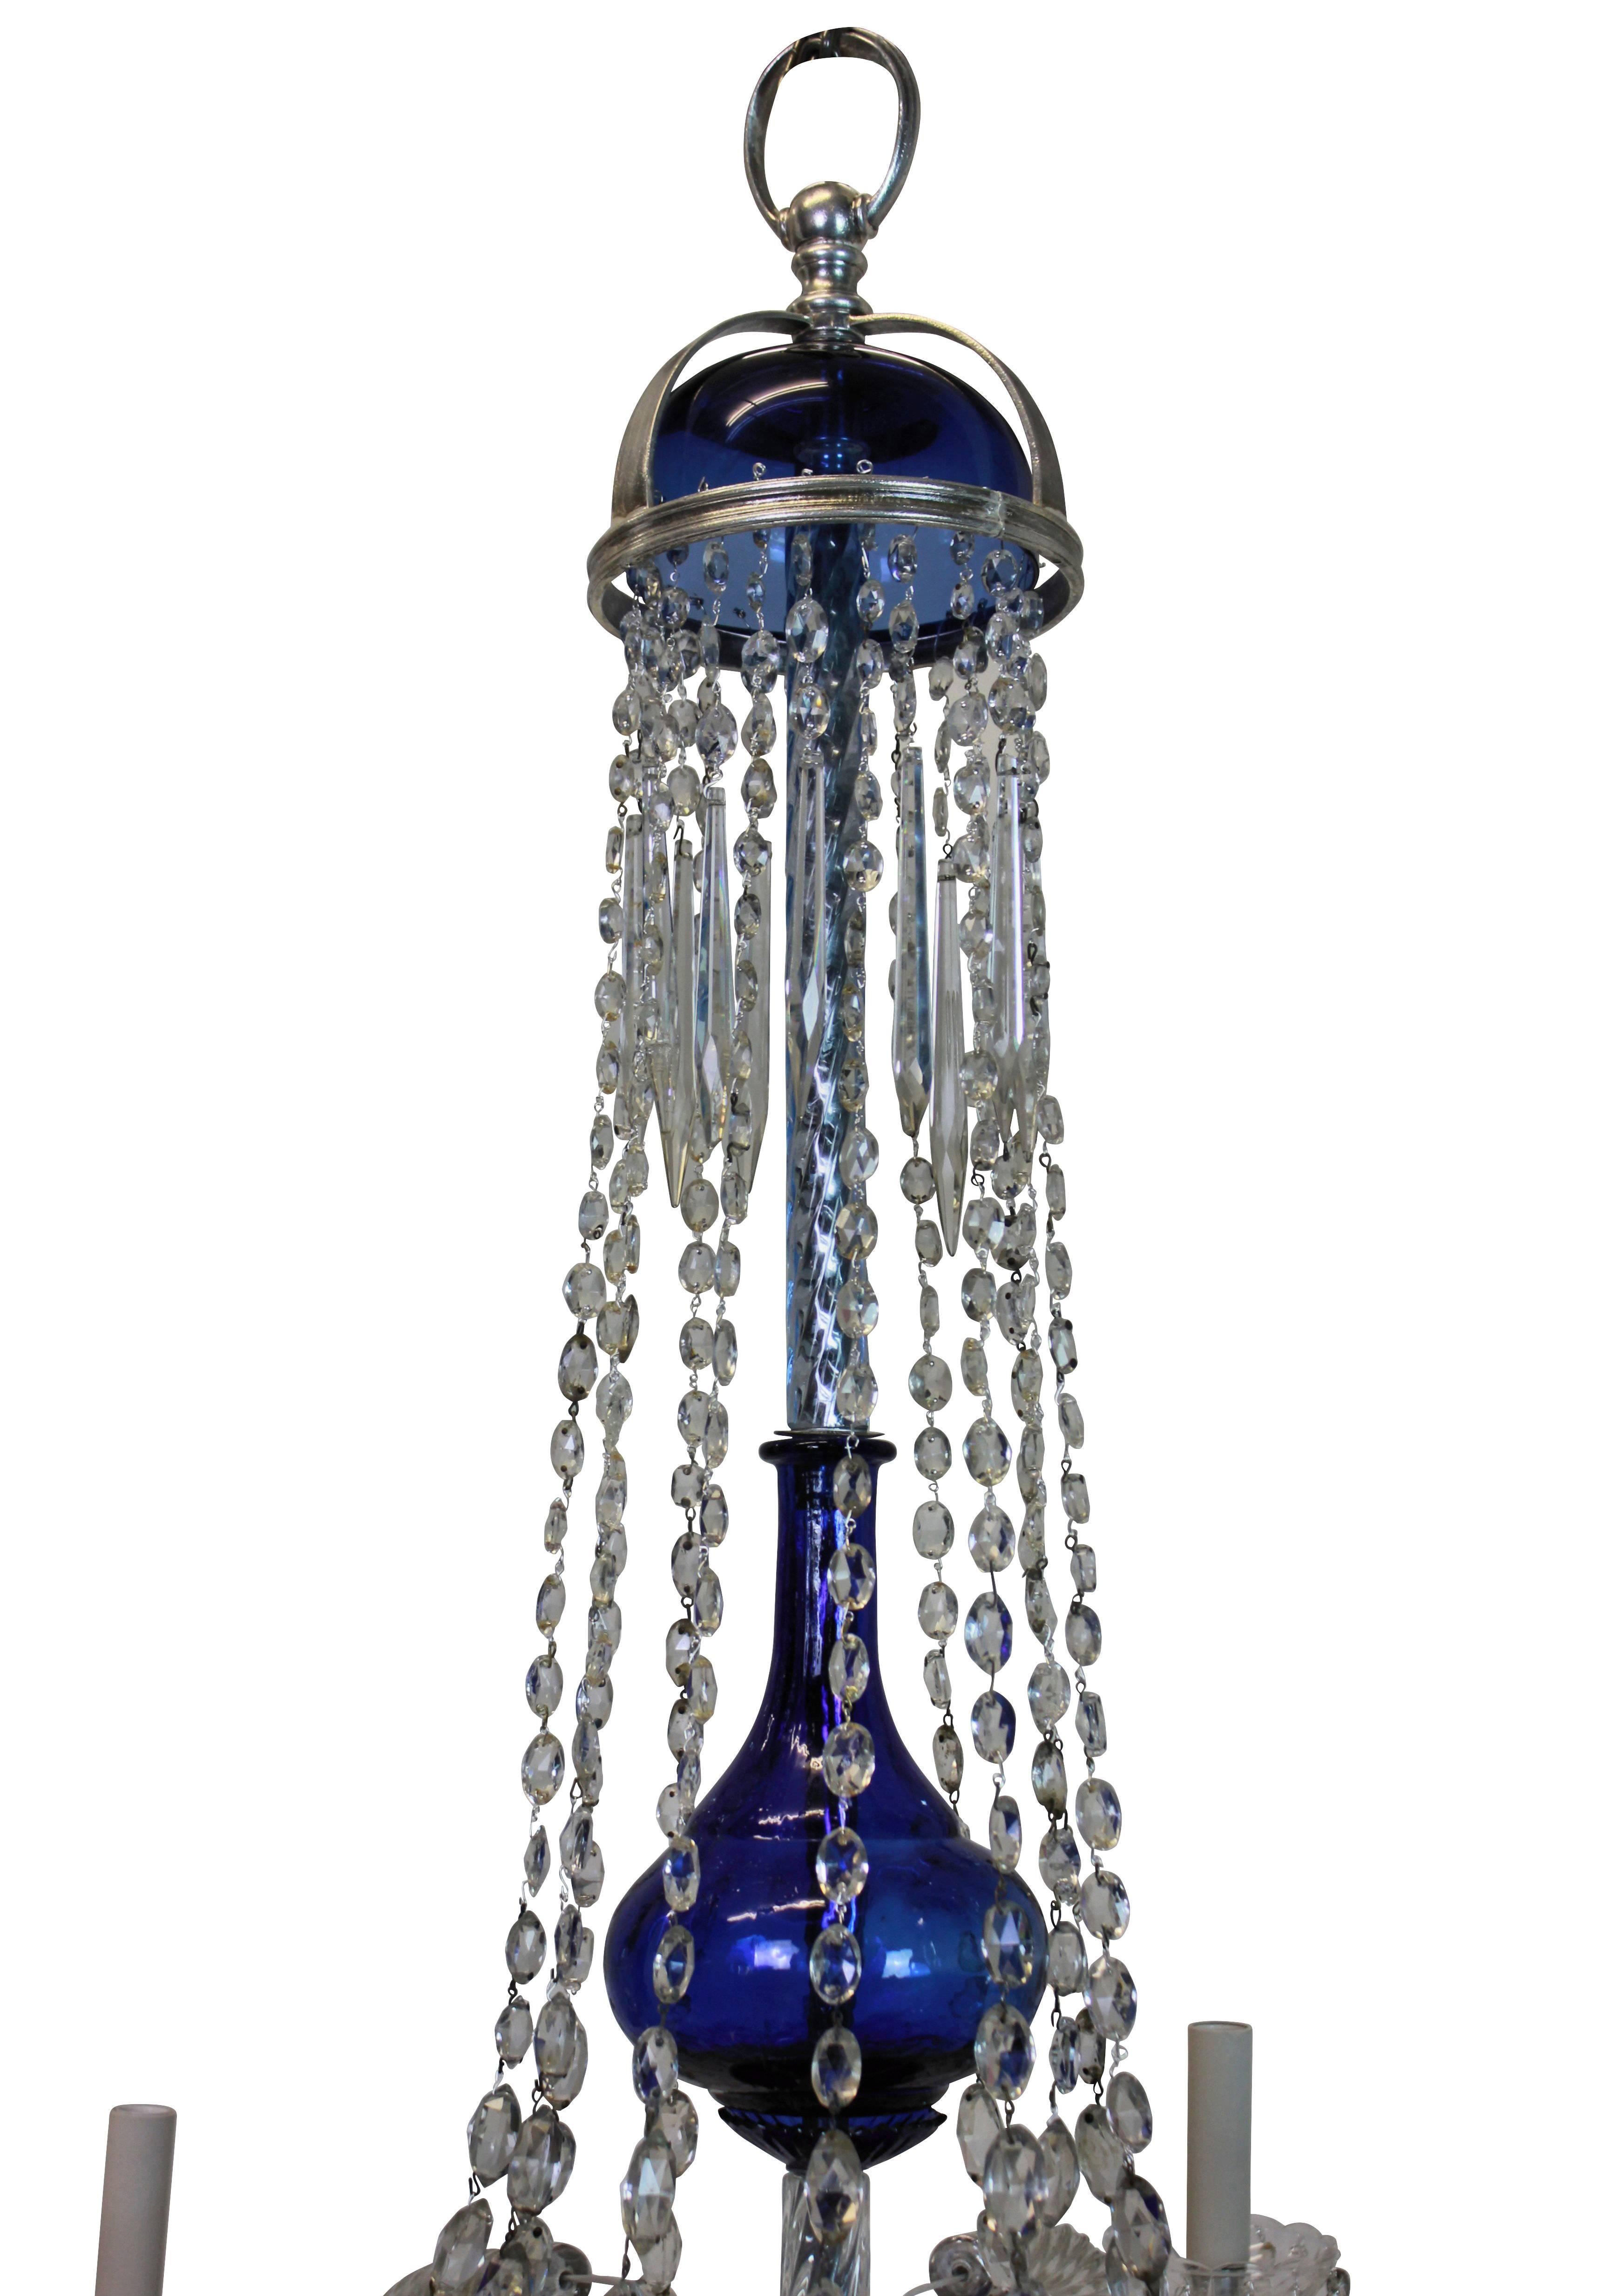 A fine Baltic chandelier with 'Baltic' blue glass and clear cut-glass dressings, arms and pendants. The metal work of silver plate. Six-arms in total.

 